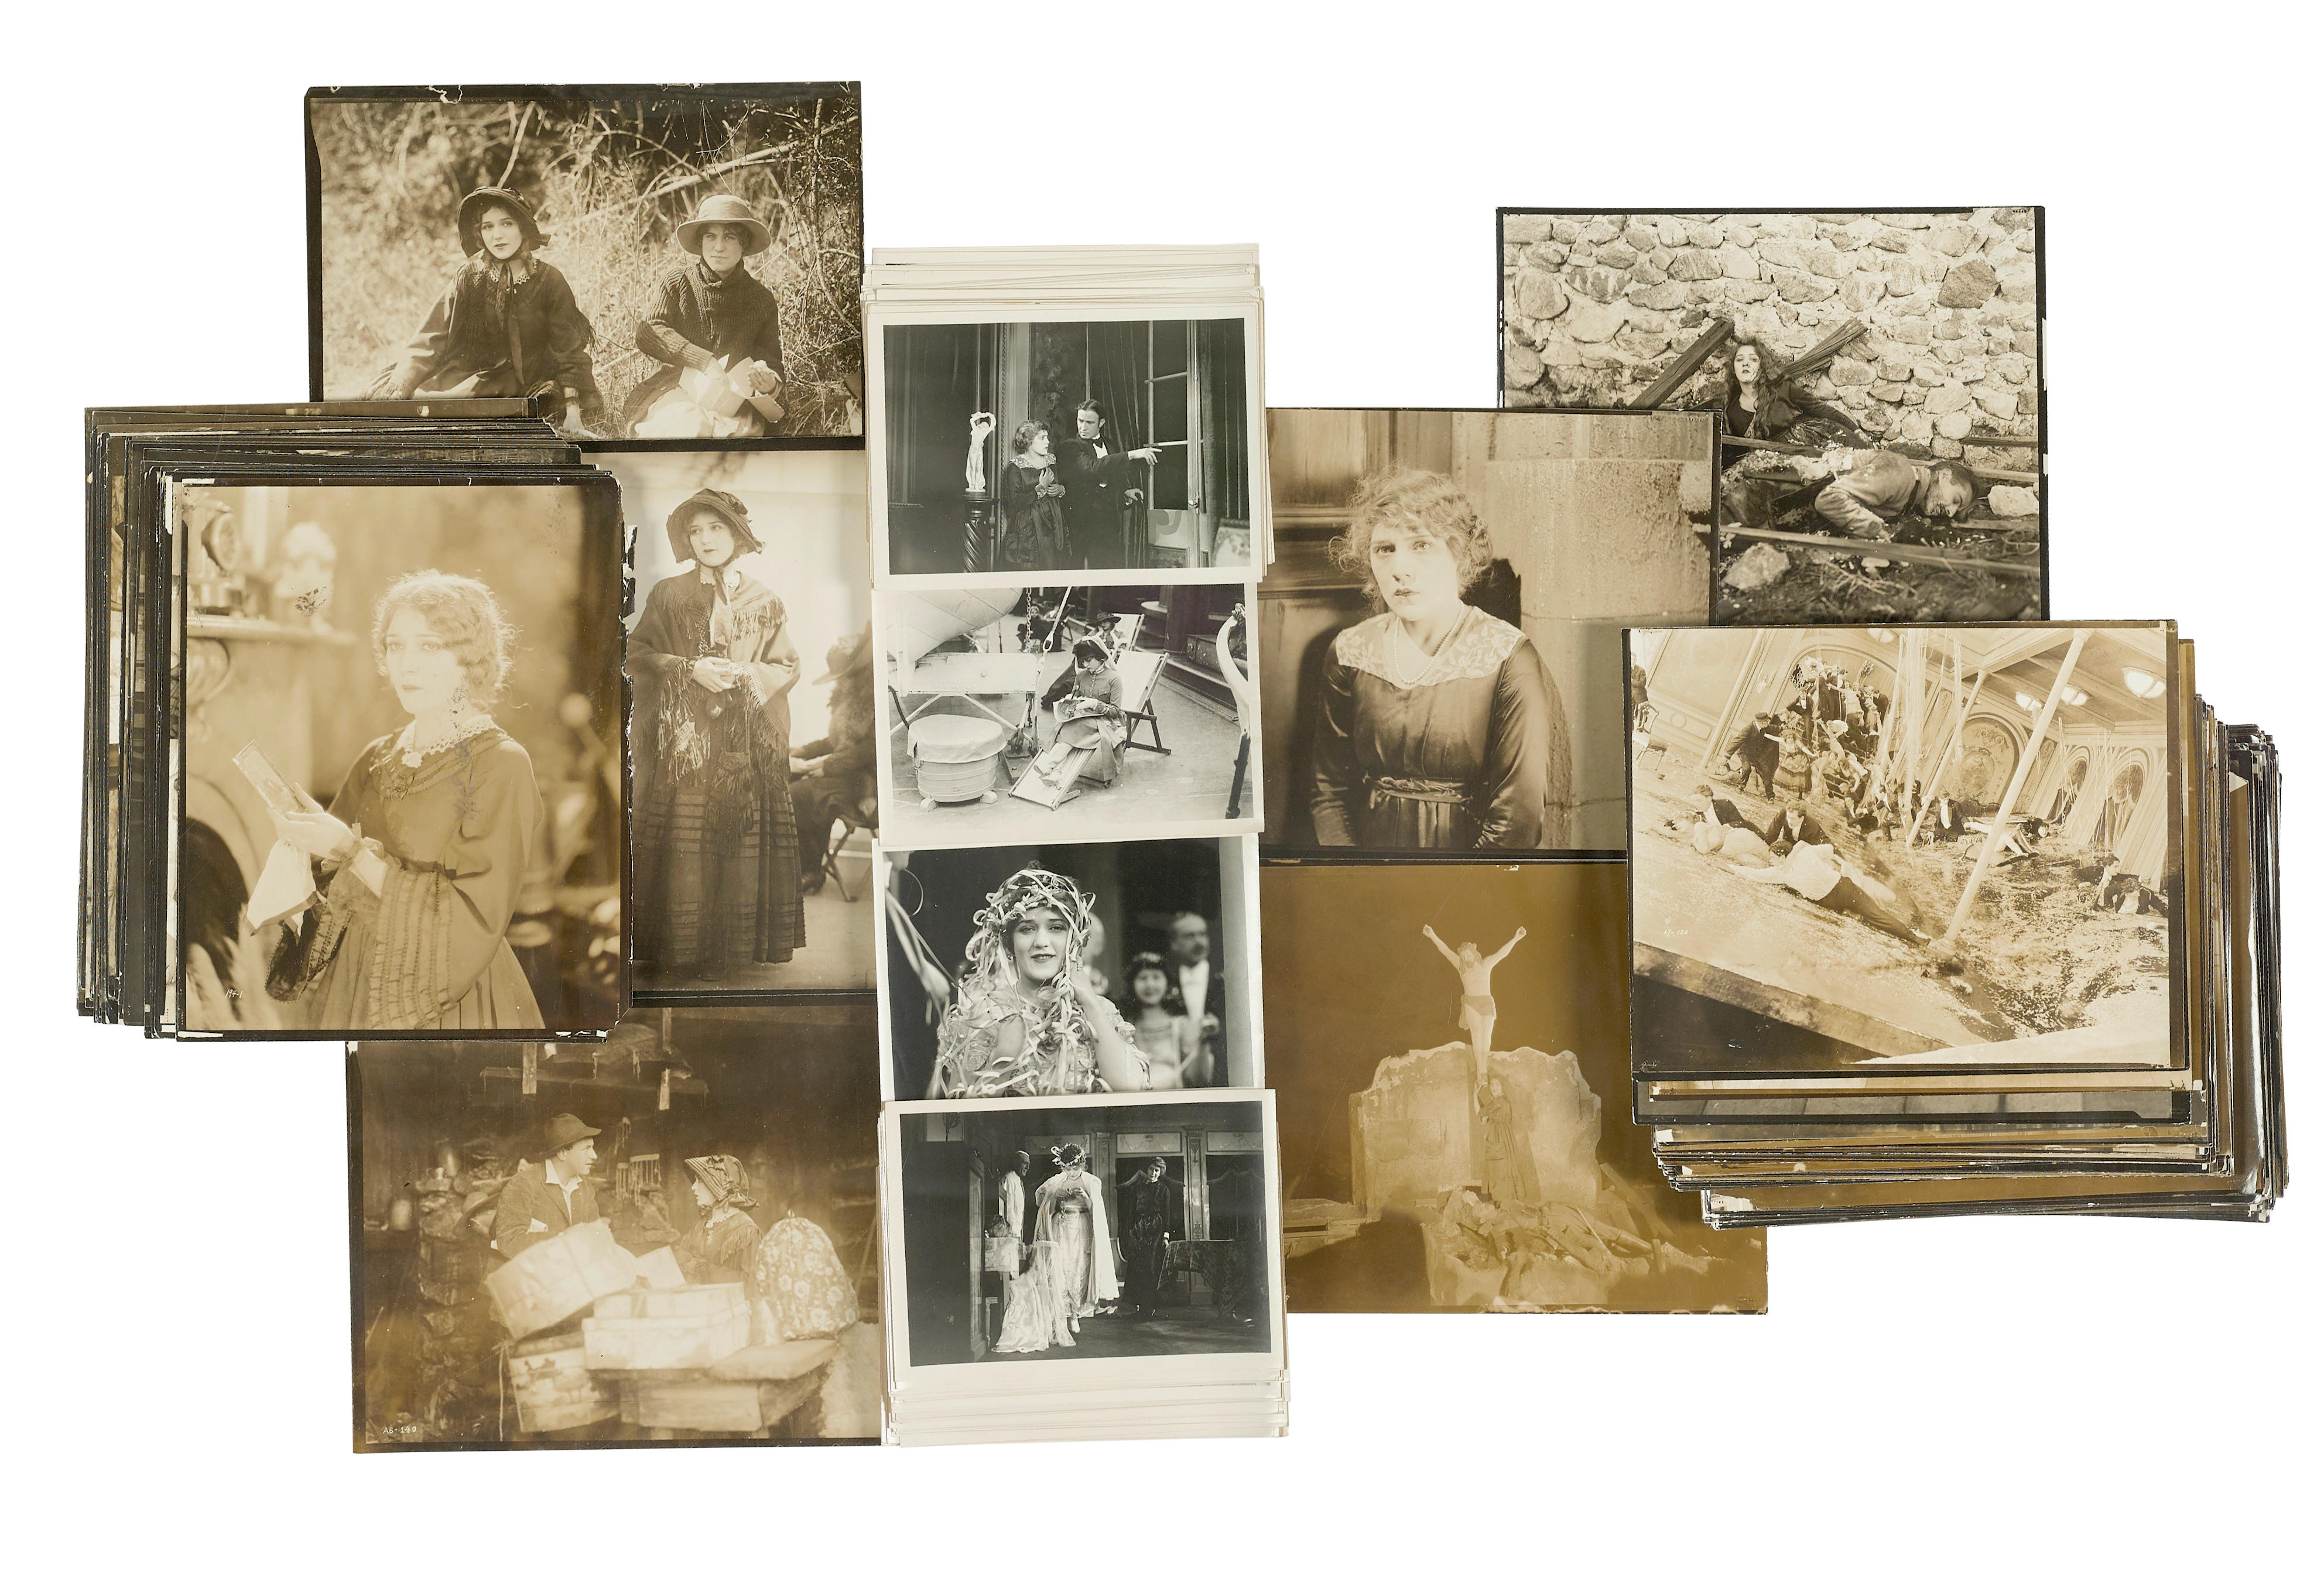 A Mary Pickford archive of photos pertaining to A Romance of the Redwoods...